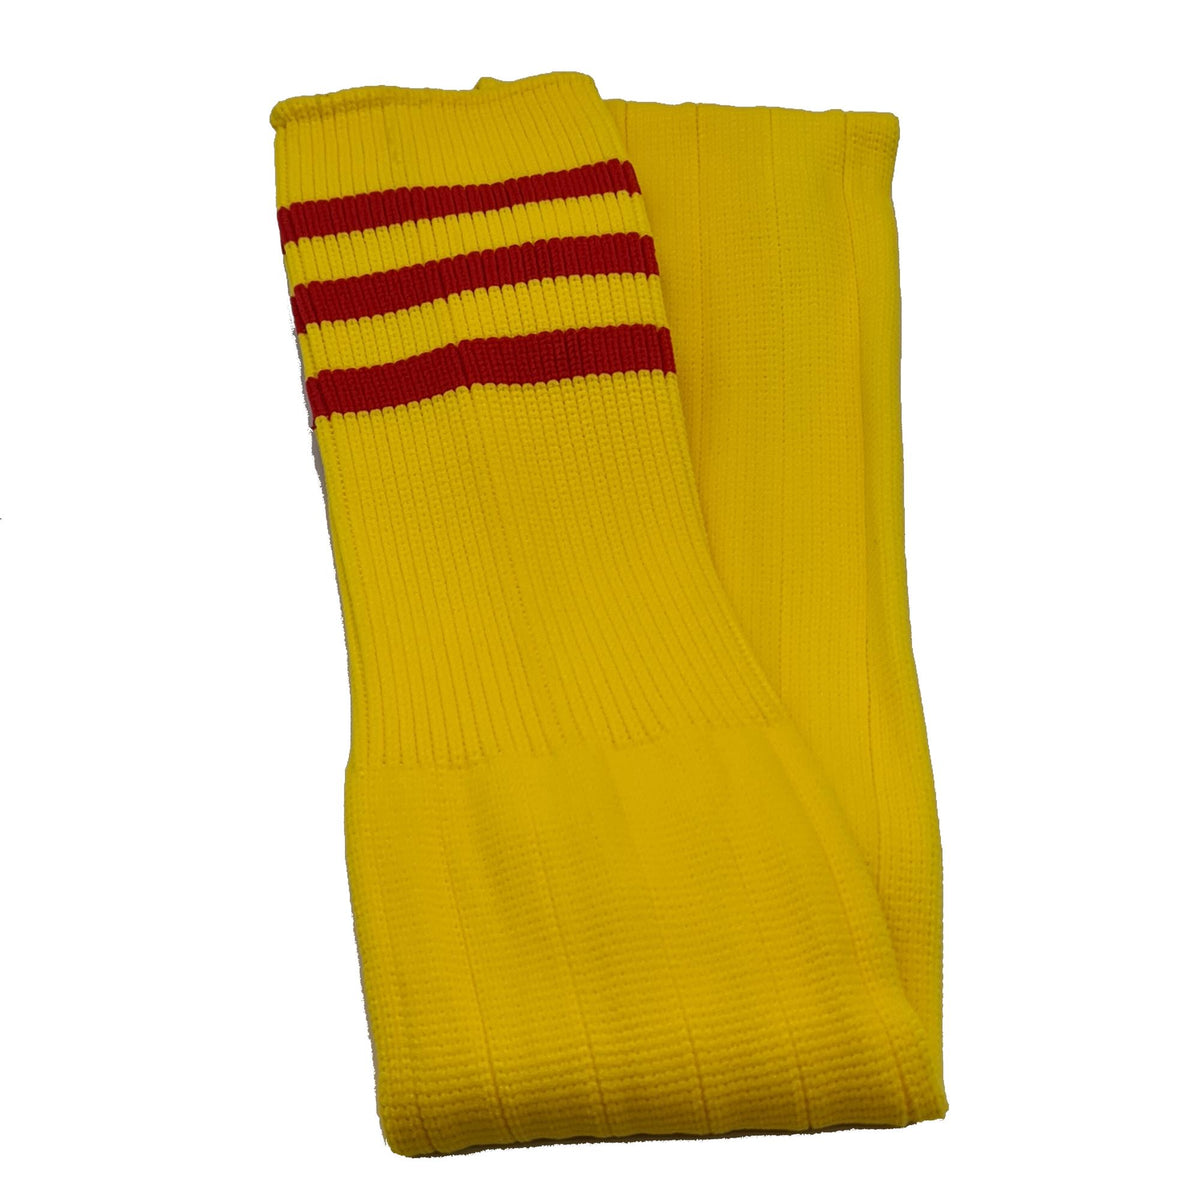 Three Stripes Football Rugby Premium Socks - Made In UK - YELLOW/RED - MENS ( UK 9-12)